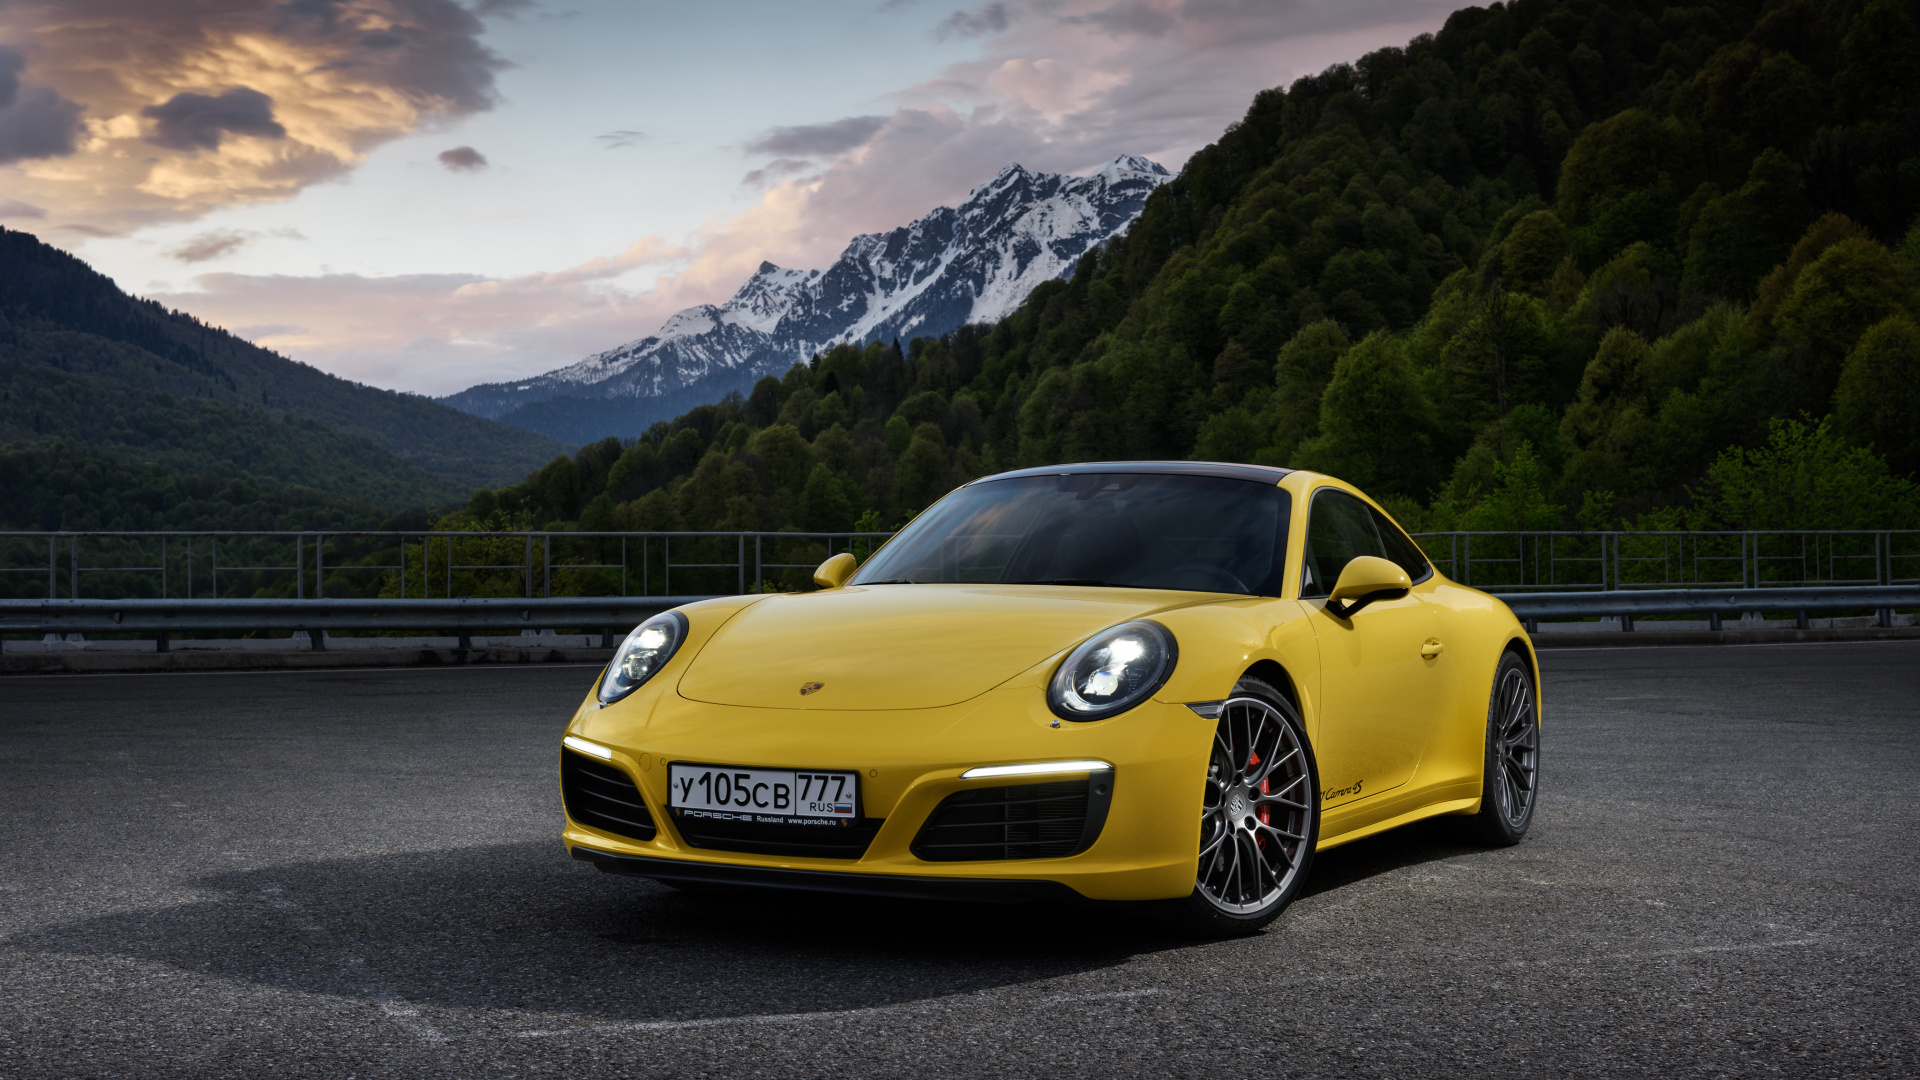 Yellow Porsche 911 on Road Near Mountain During Daytime. Wallpaper in 1920x1080 Resolution